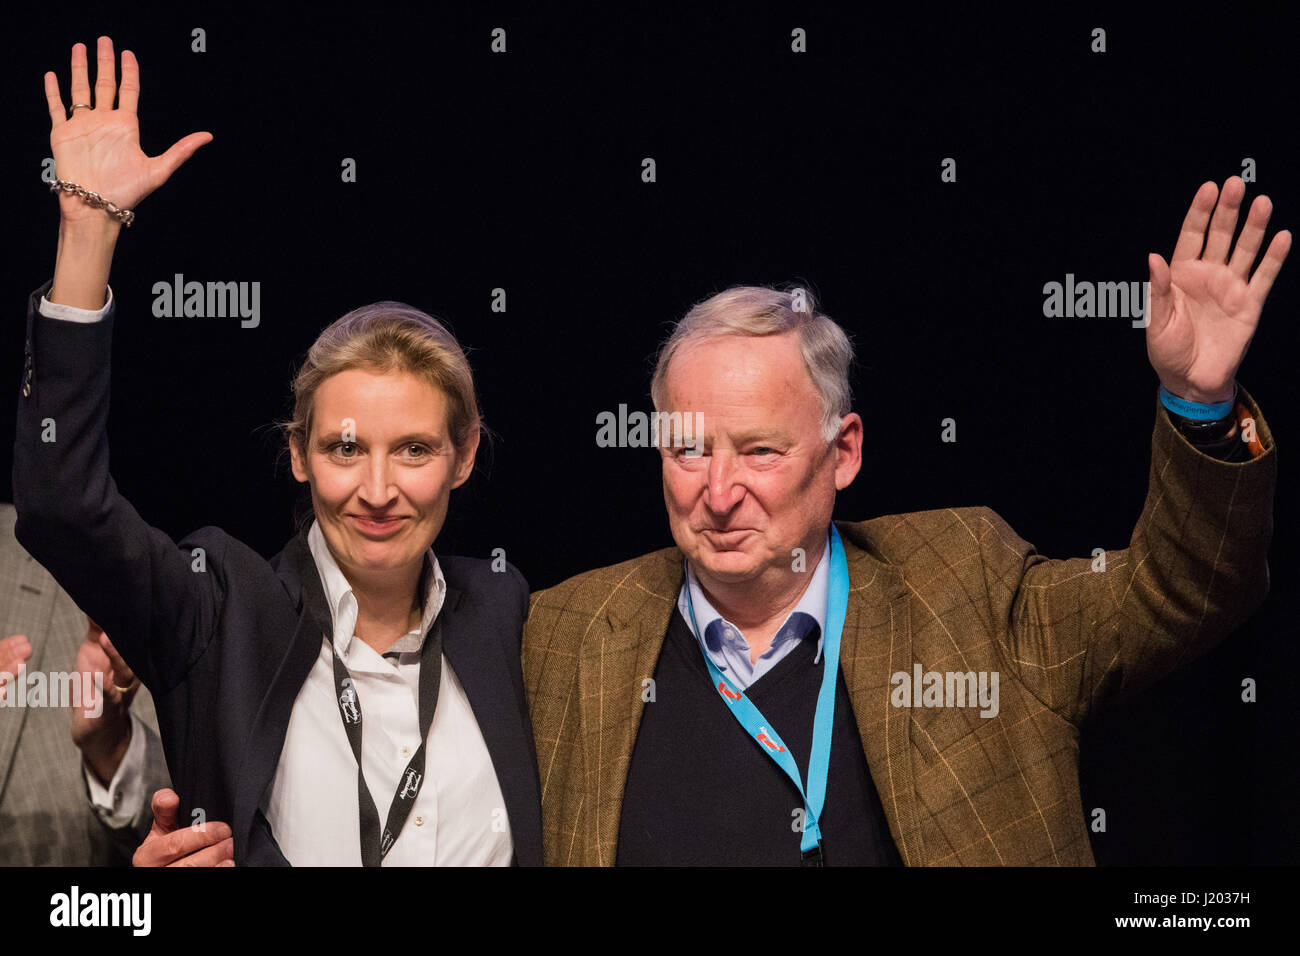 Cologne, Germany. 23rd Apr, 2017. dpatop - Alice Weidel (l) and Alexander Gauland, members of the AfD federal management board, photographed at the party's national convention in the Maritim Hotel in Cologne, Germany, 23 April 2017. The rightist-nationalist vice chairman of the party Alexander Gauland and the liberal Alice Weidel will lead the AfD party into the national elections. Photo: Rolf Vennenbernd/dpa/Alamy Live News Stock Photo